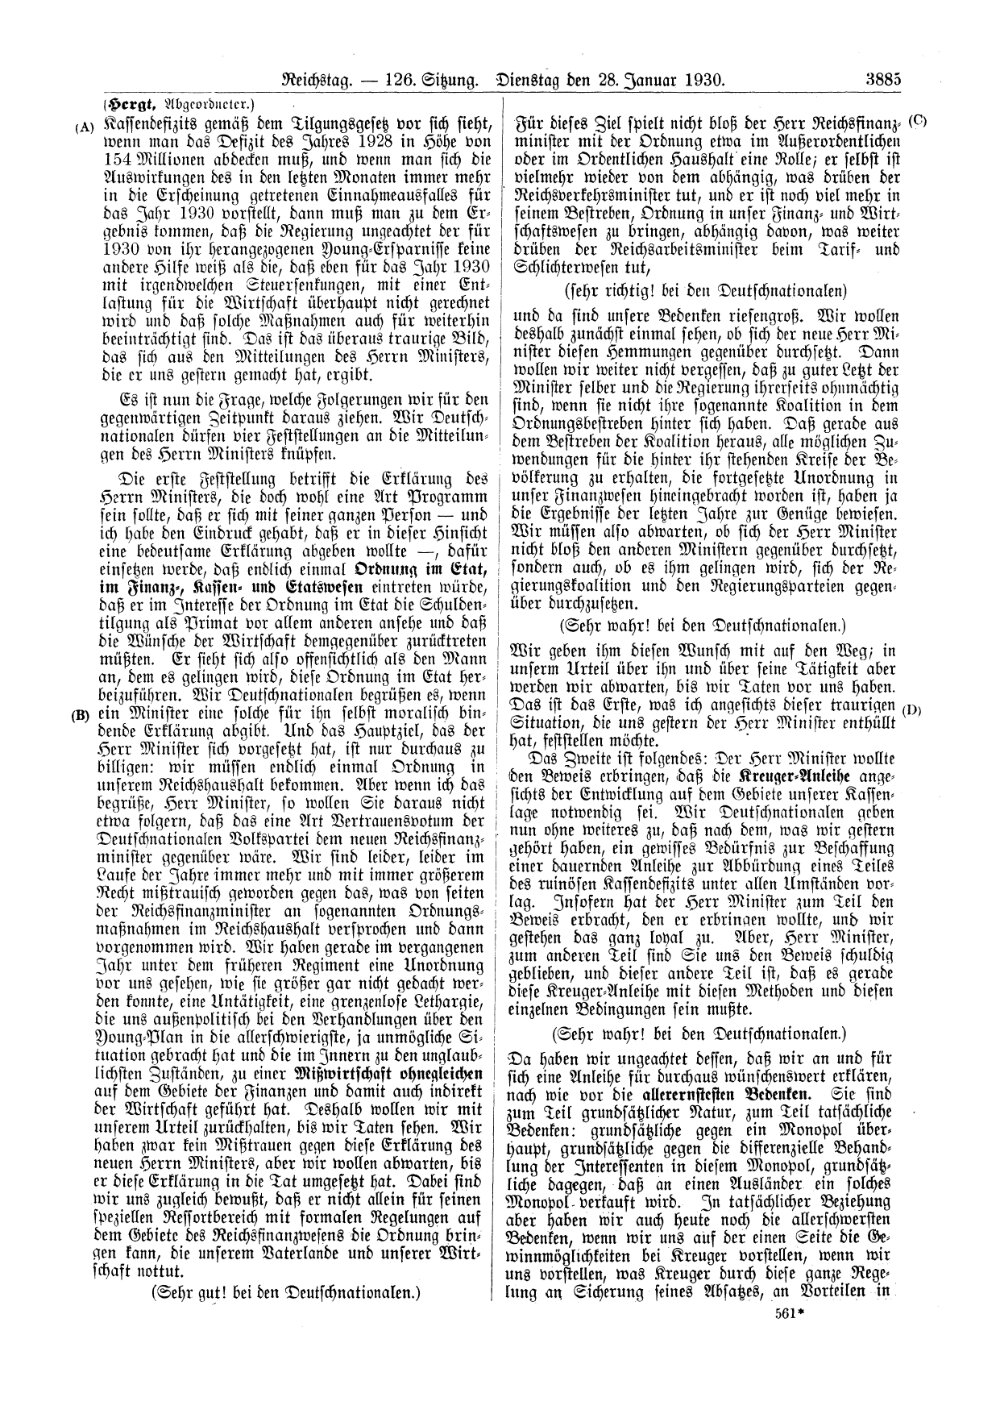 Scan of page 3885